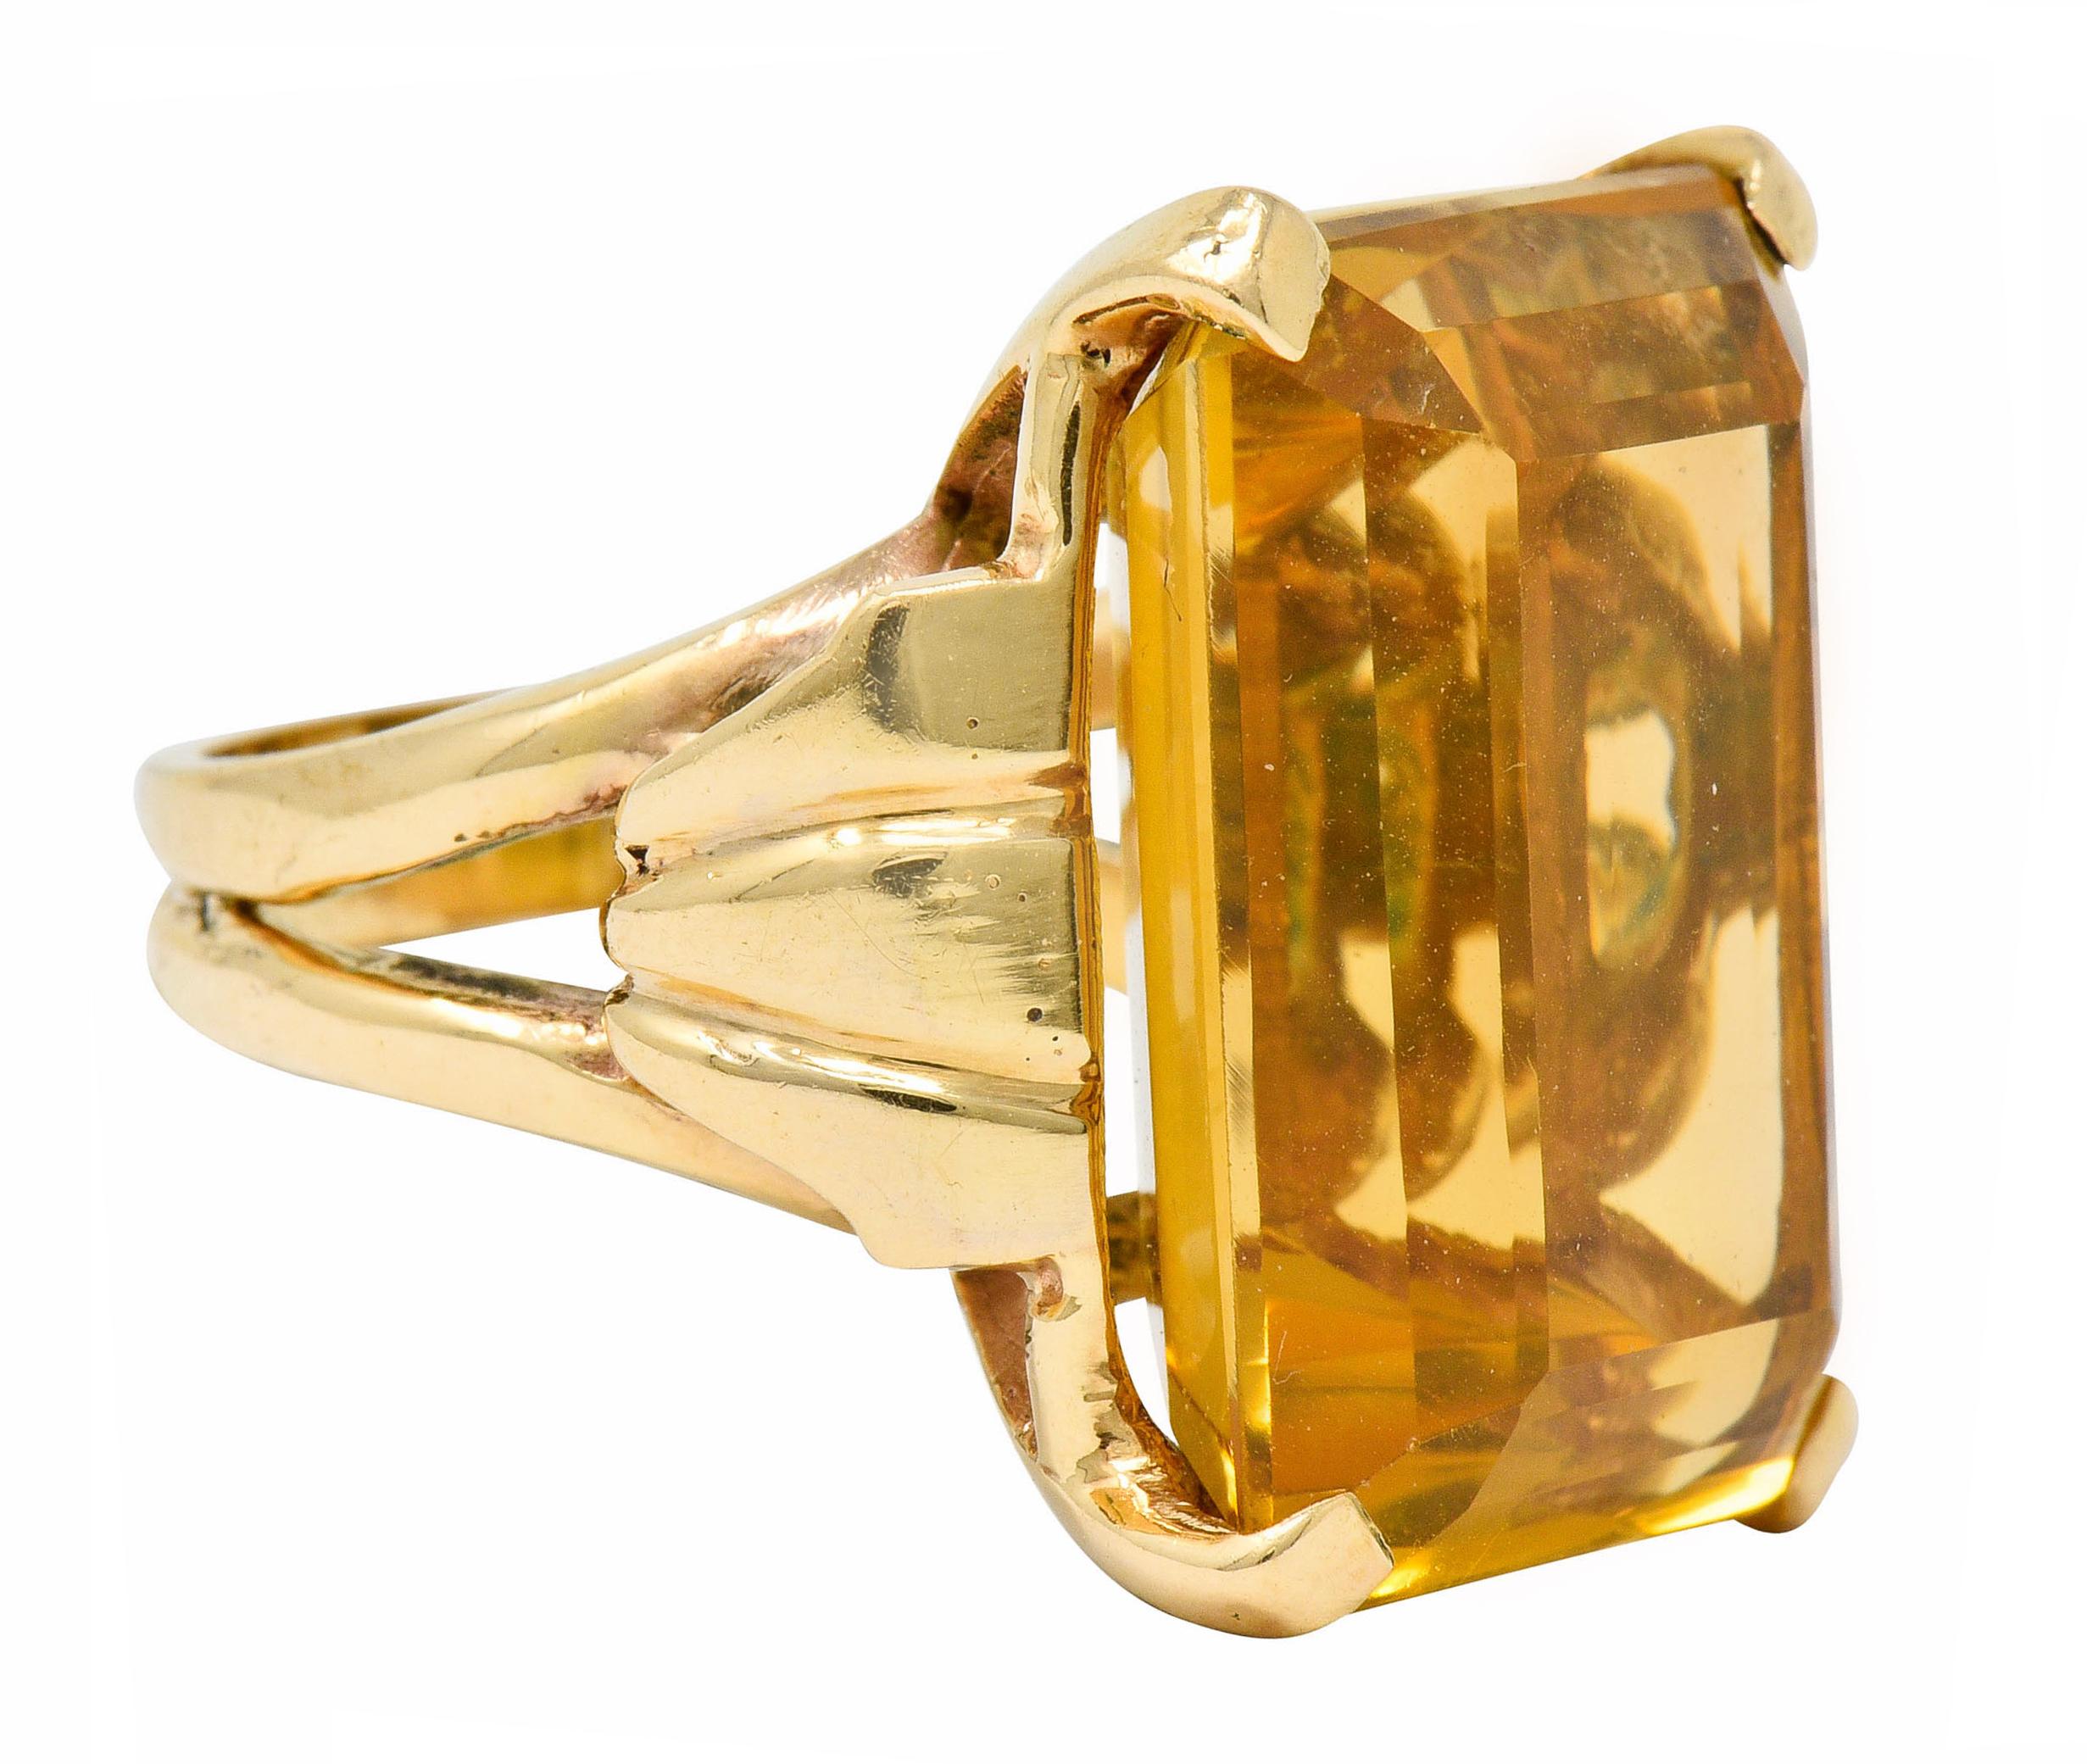 Centering a basket set emerald cut citrine measuring approximately 22.5 x 16.8 mm

Transparent with sunny very slightly orangey-yellow color, even in distribution

Completed by a split shank featuring scrolled shoulder motif

Stamped 14K for 14